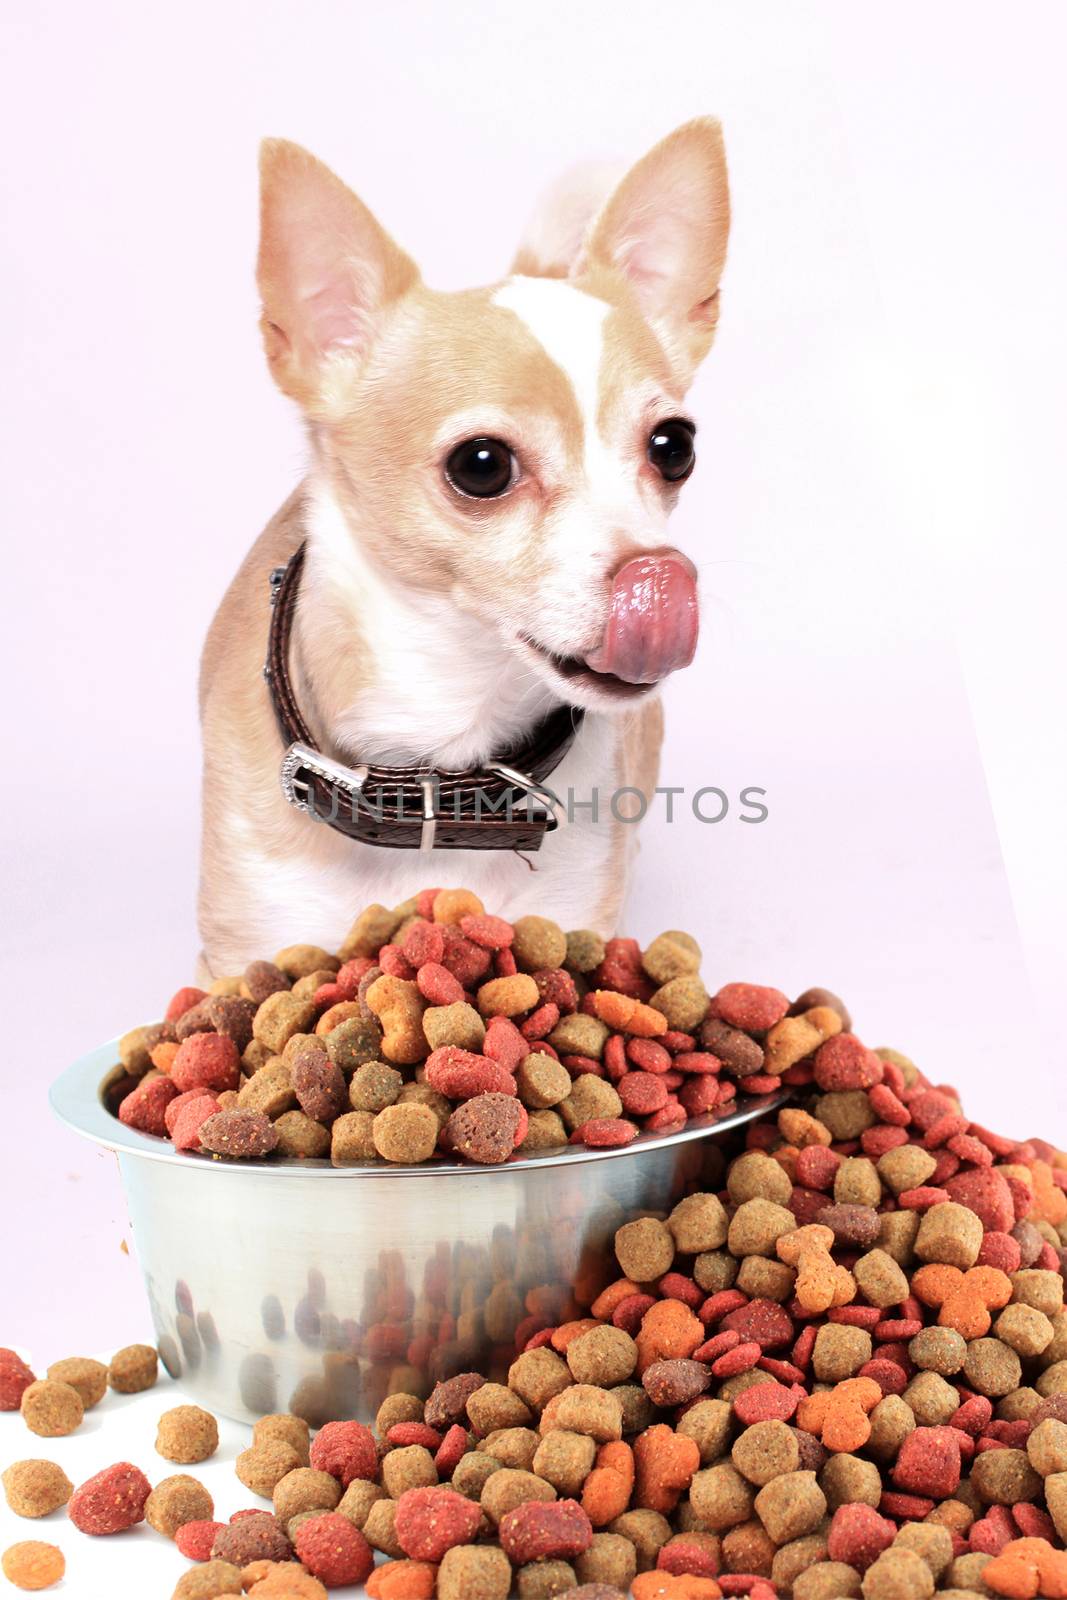 Small chihuahua dog licking his lips and nose ready to eat dog food that's spilling over from a tin silver bowl on a white background